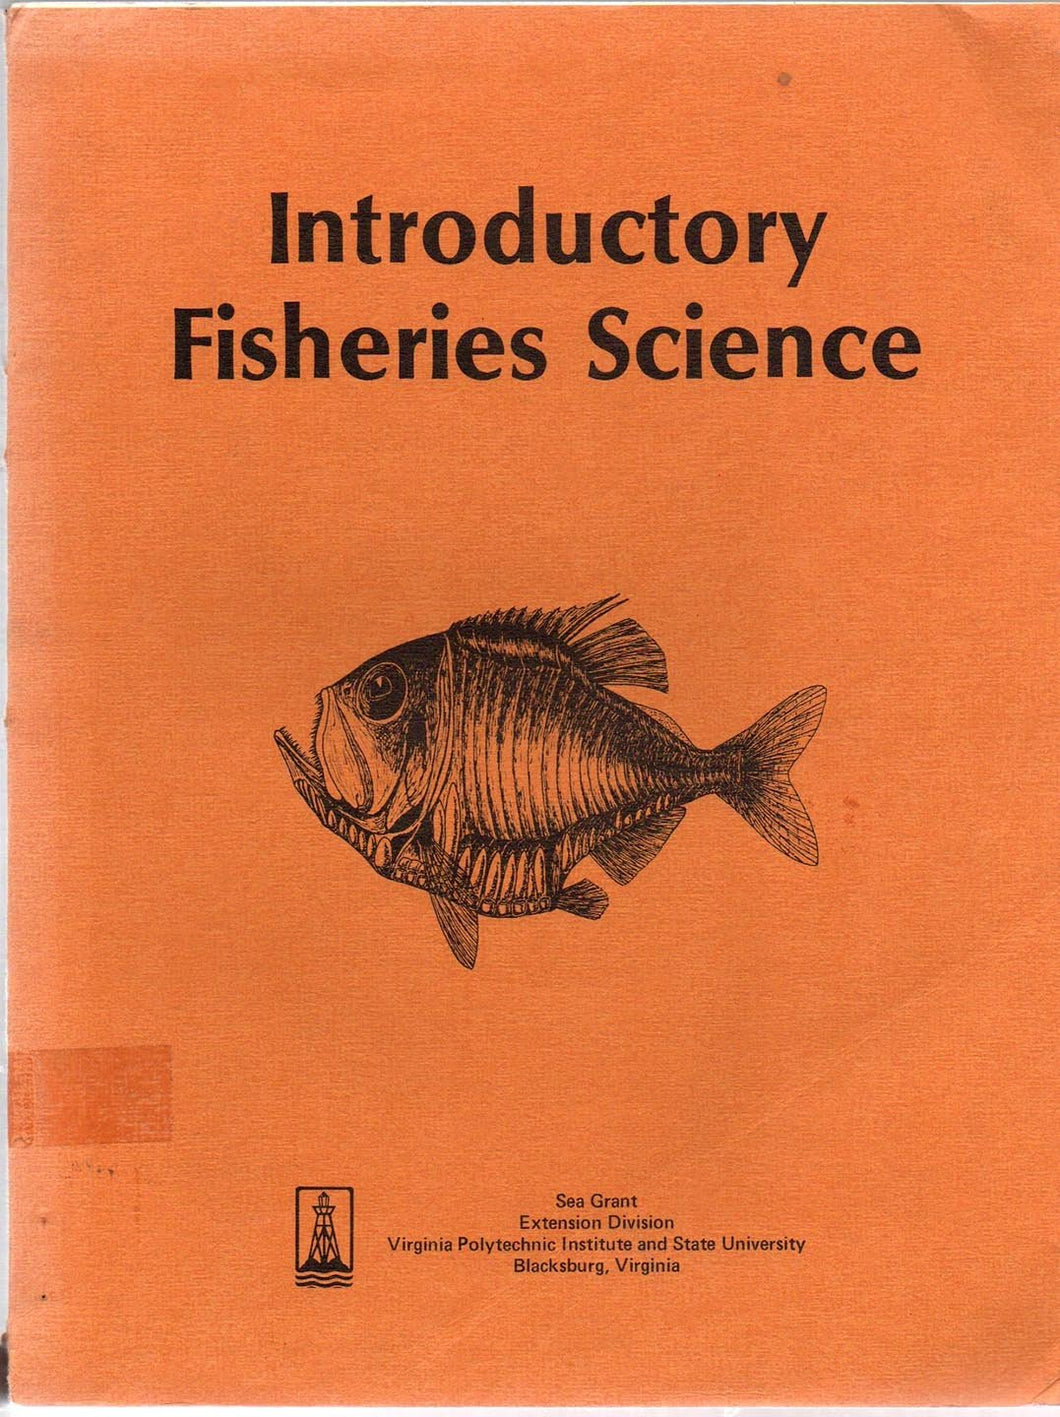 Introductory Fisheries Science